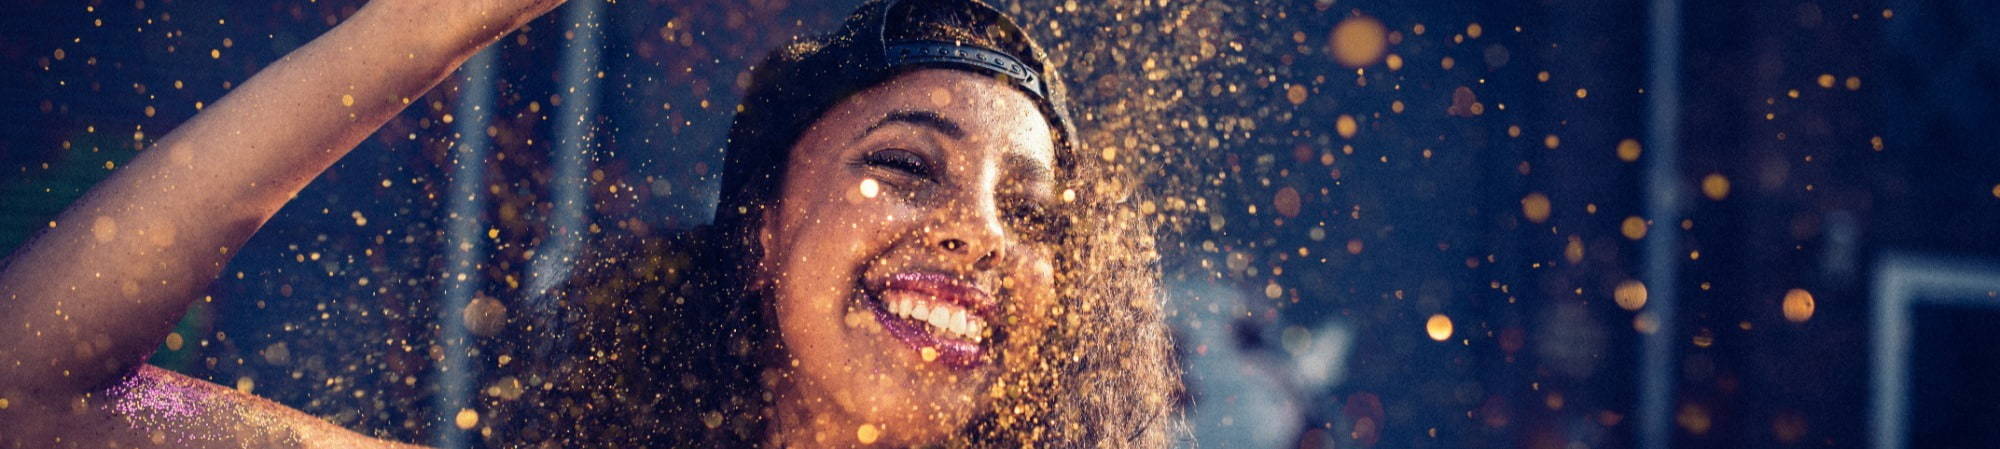 Smiling Woman wearing backwards baseball cap throwing gold glitter in the air